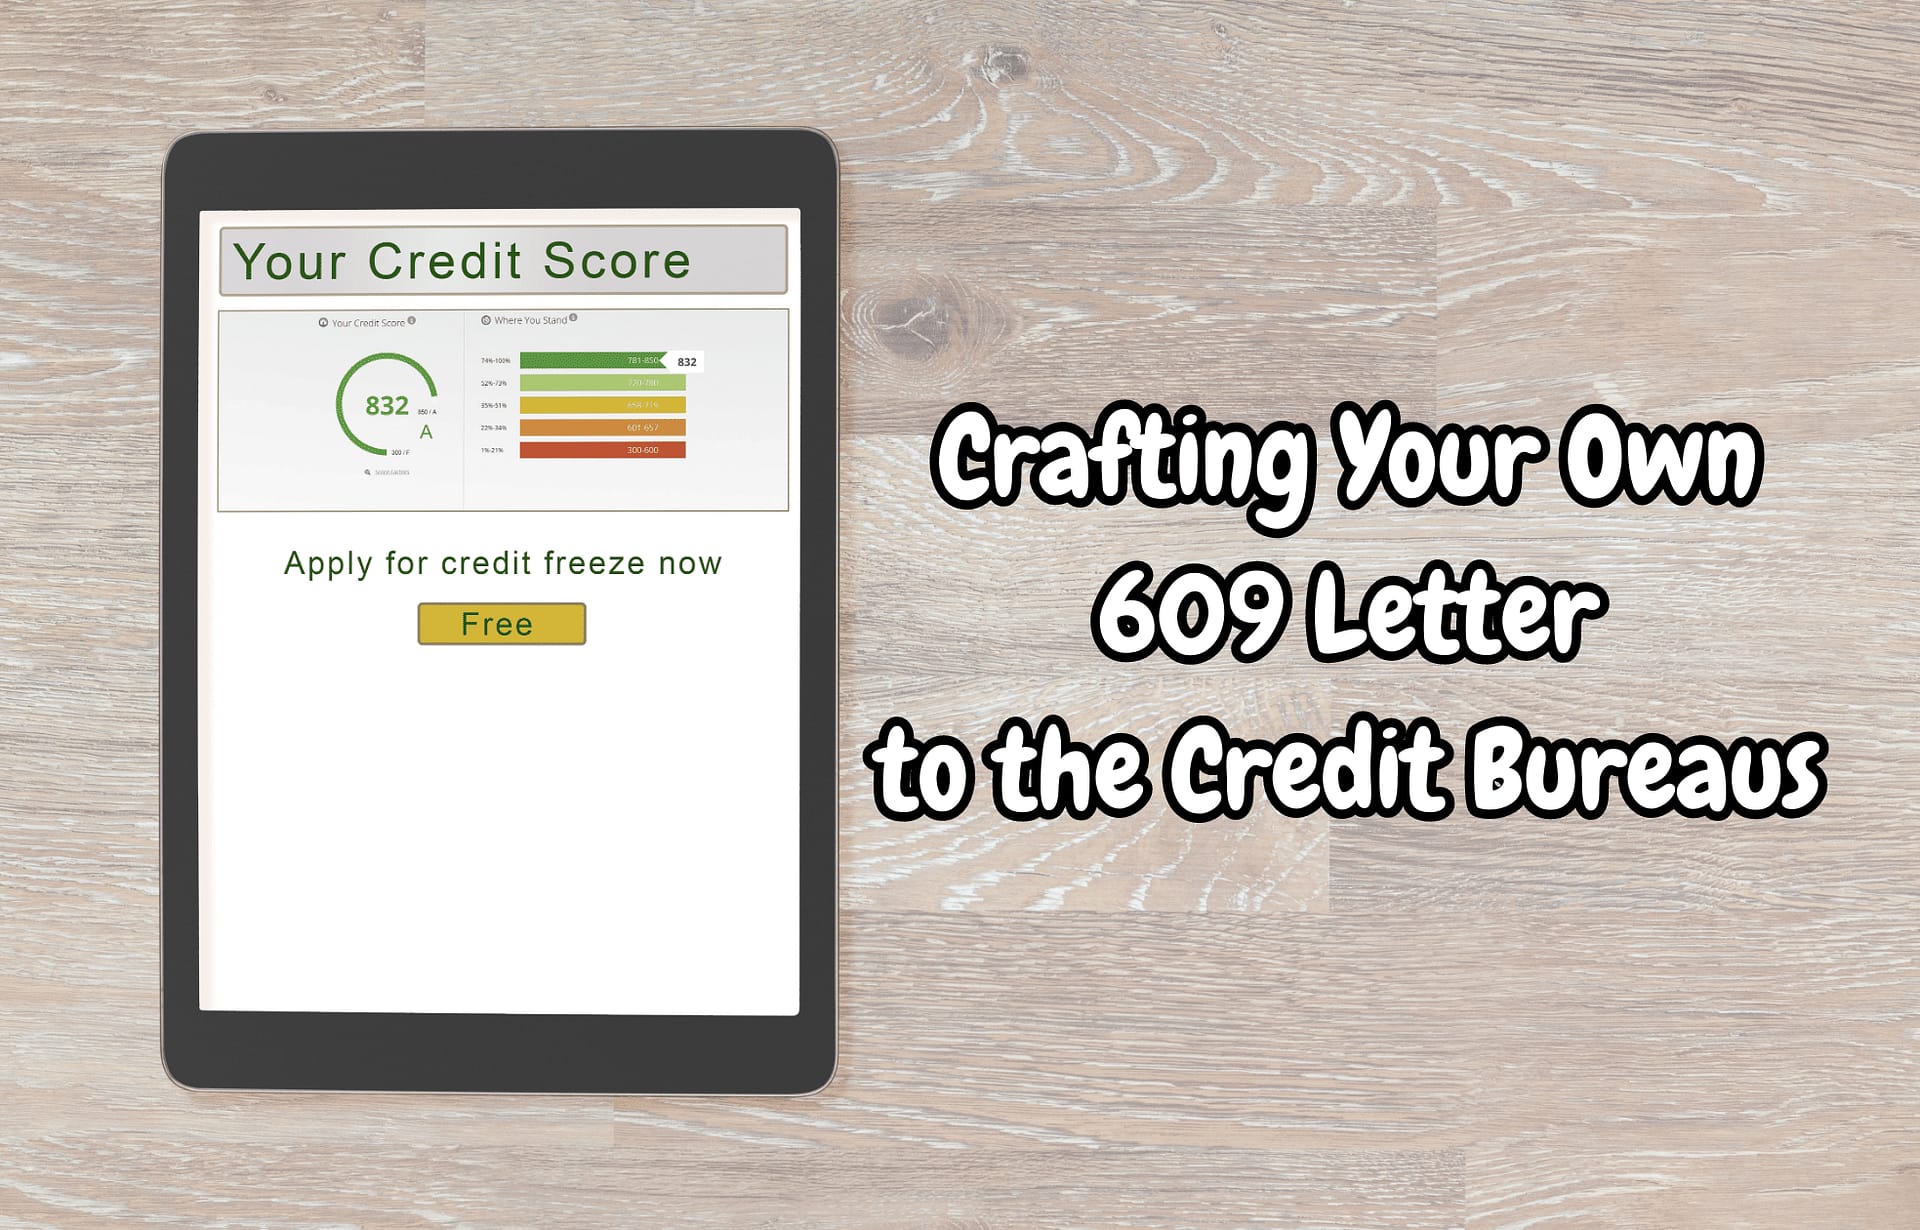 submitting a 609 letter to the 3 major credit bureaus